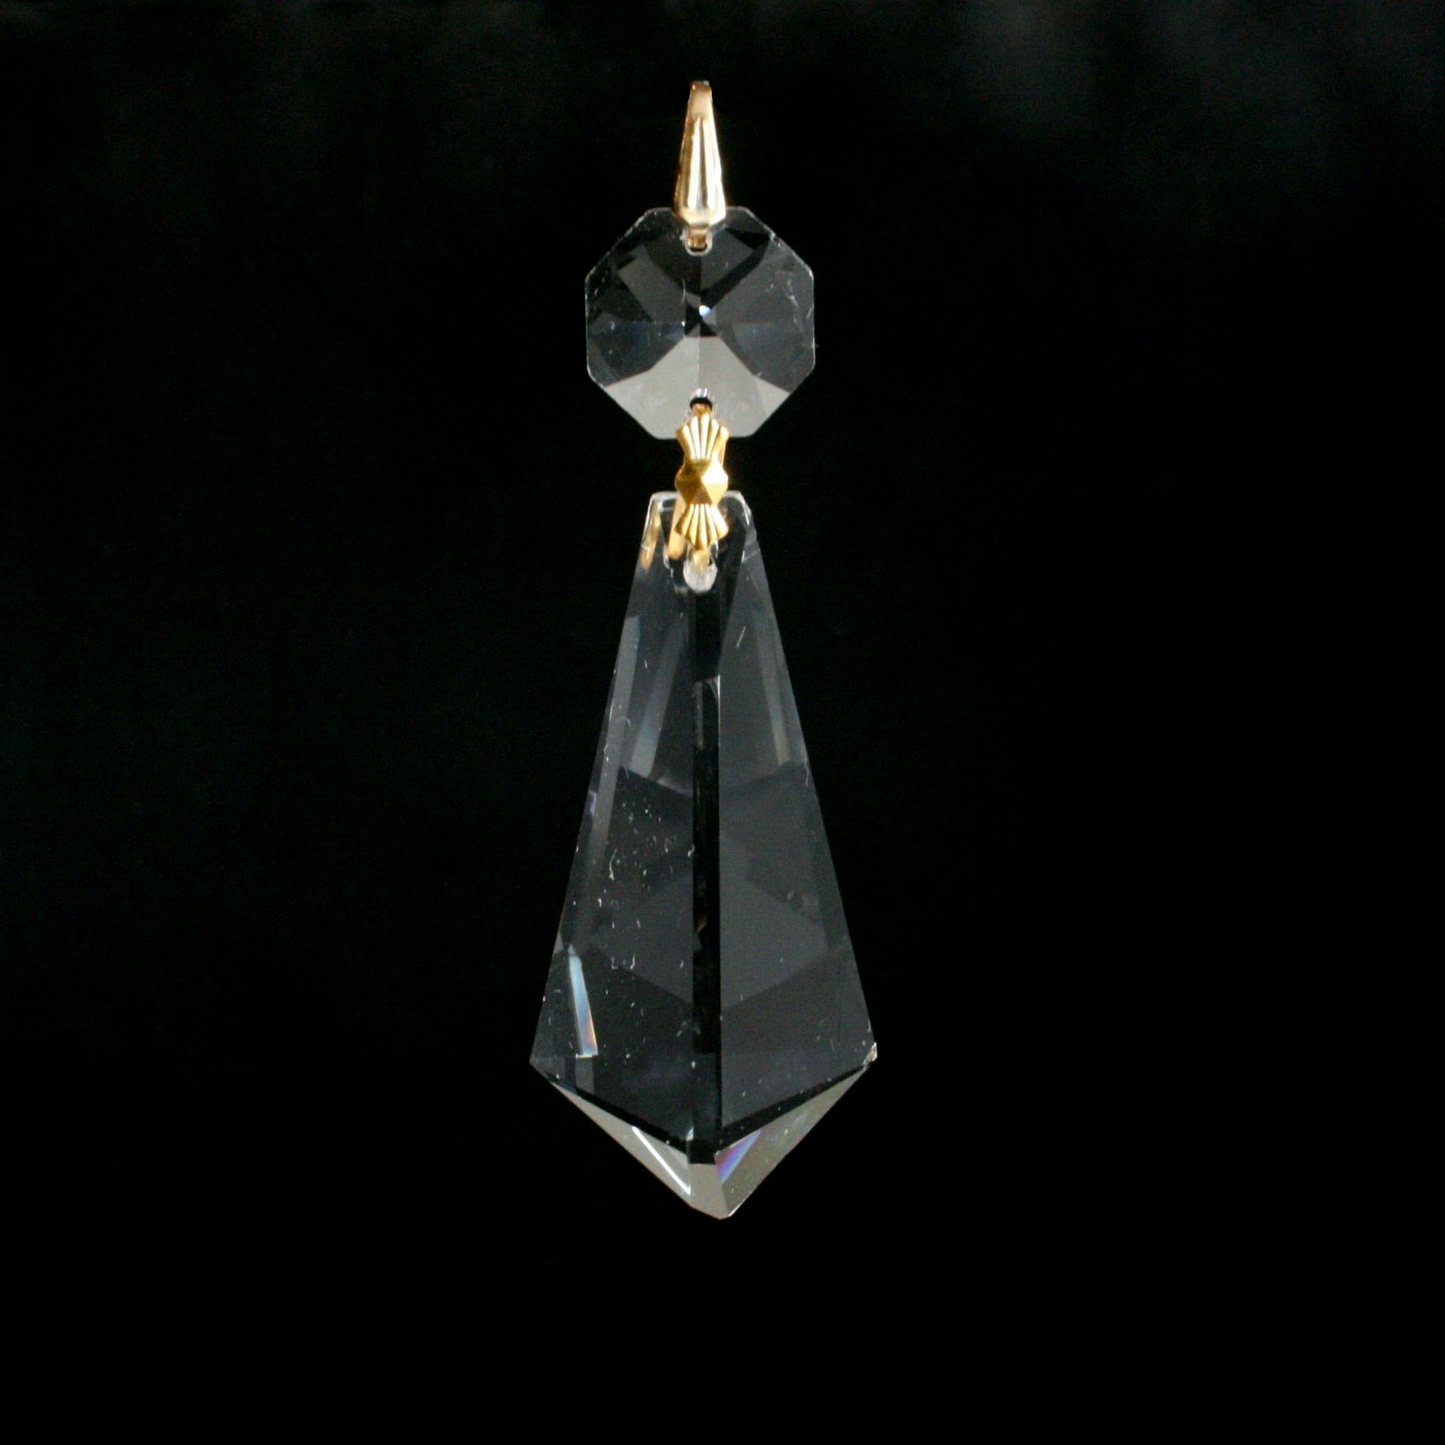 2" Triangle Crystal Prism w/ Top Bead